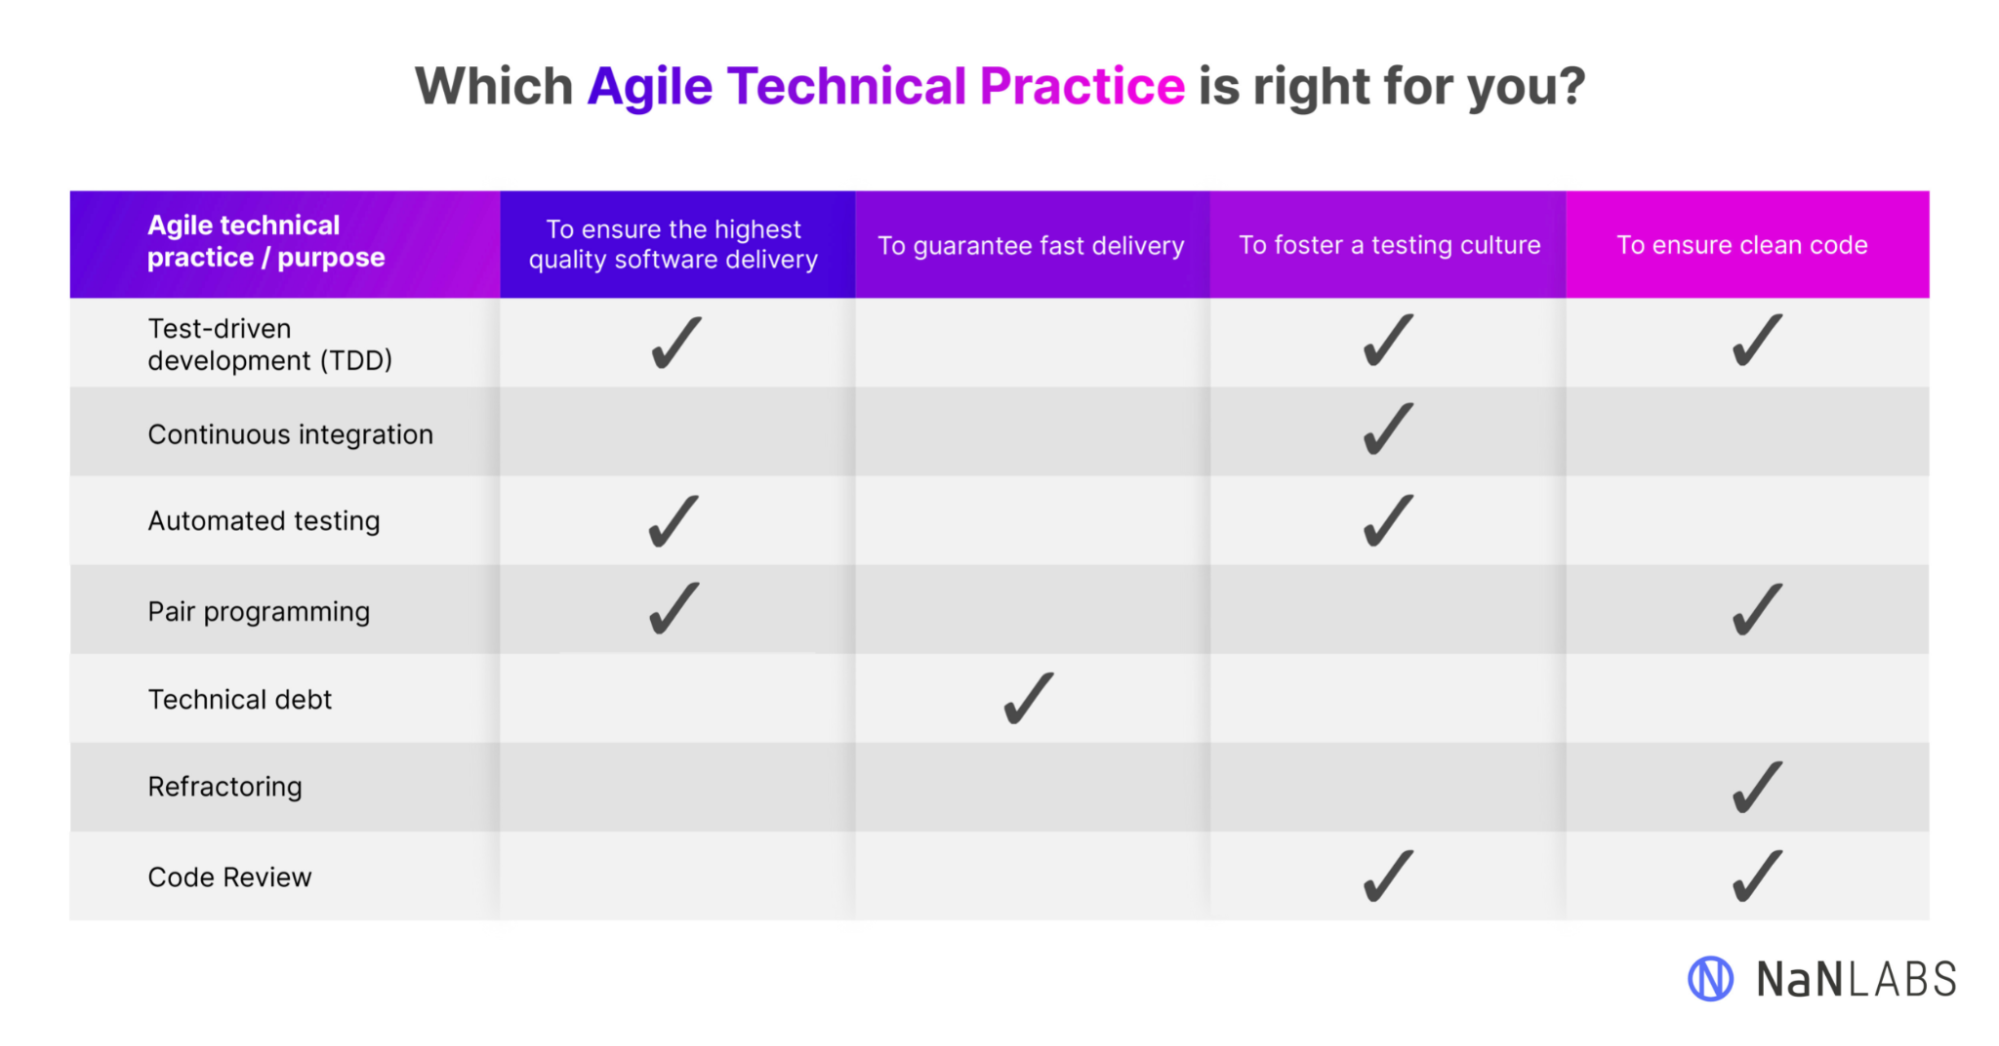 Which agile technical practice is right for you?